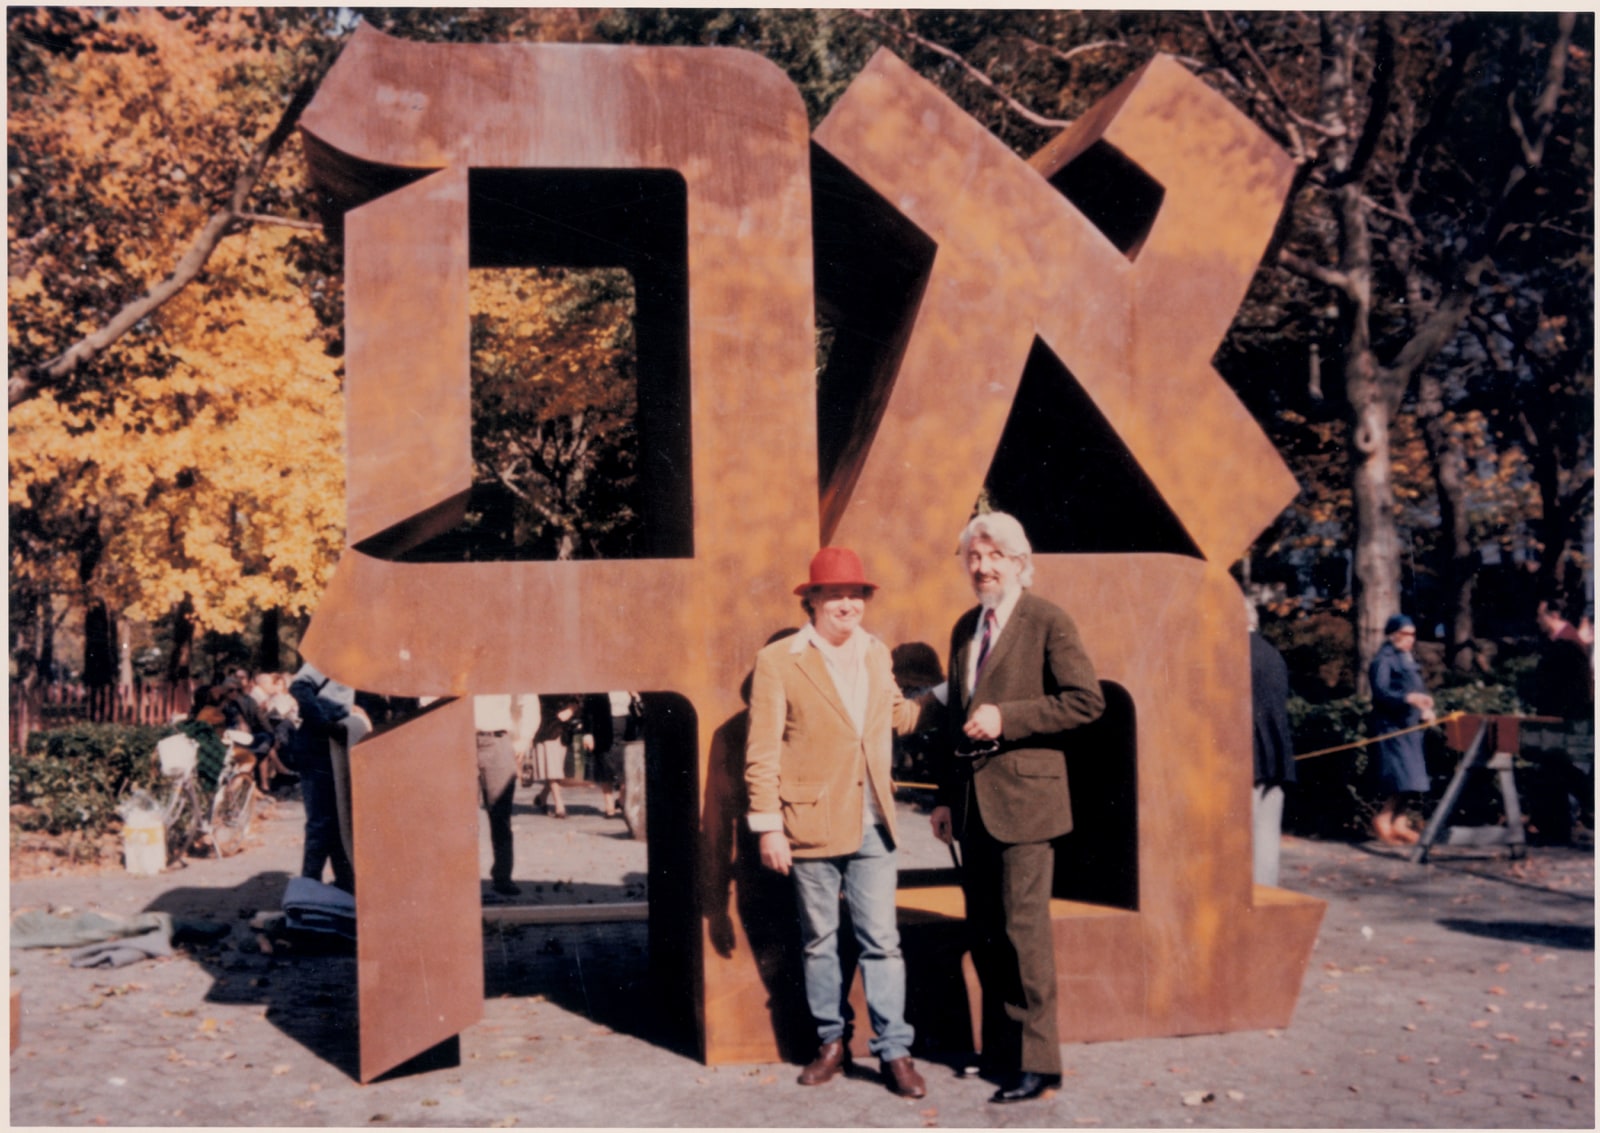 Indiana and Robert L. B. Tobin with AHAVA (1977), installed at Fifth Avenue and Sixtieth Street, New York, October 25, 1978. Image courtesy of Star of Hope Foundation, Vinalhaven, Maine